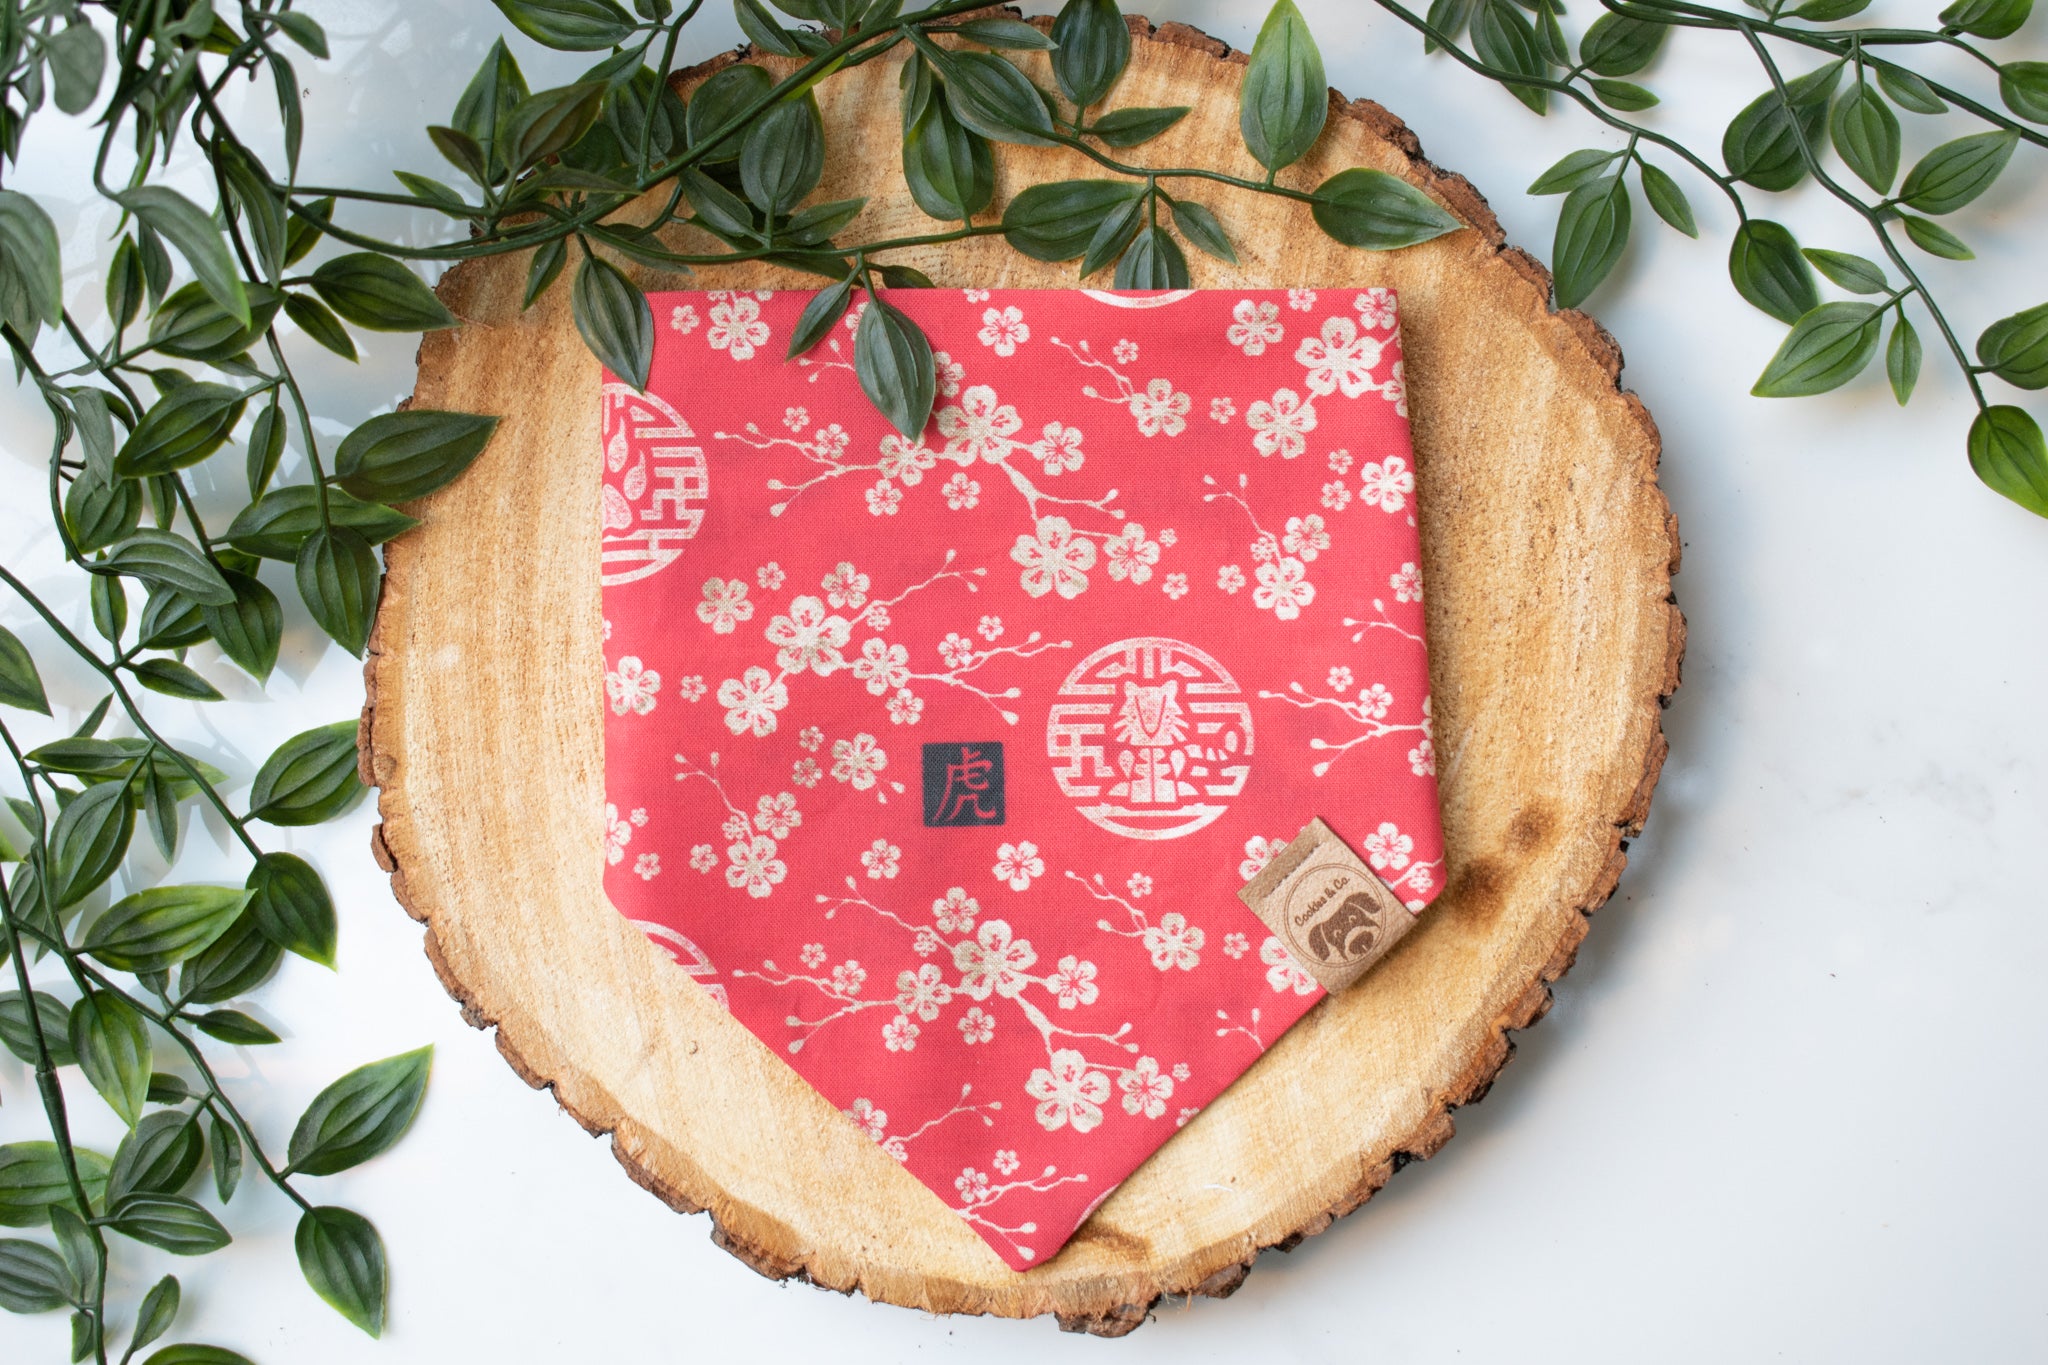 Year of the Tiger - Dog Bandana Tie-On with Snap Buttons